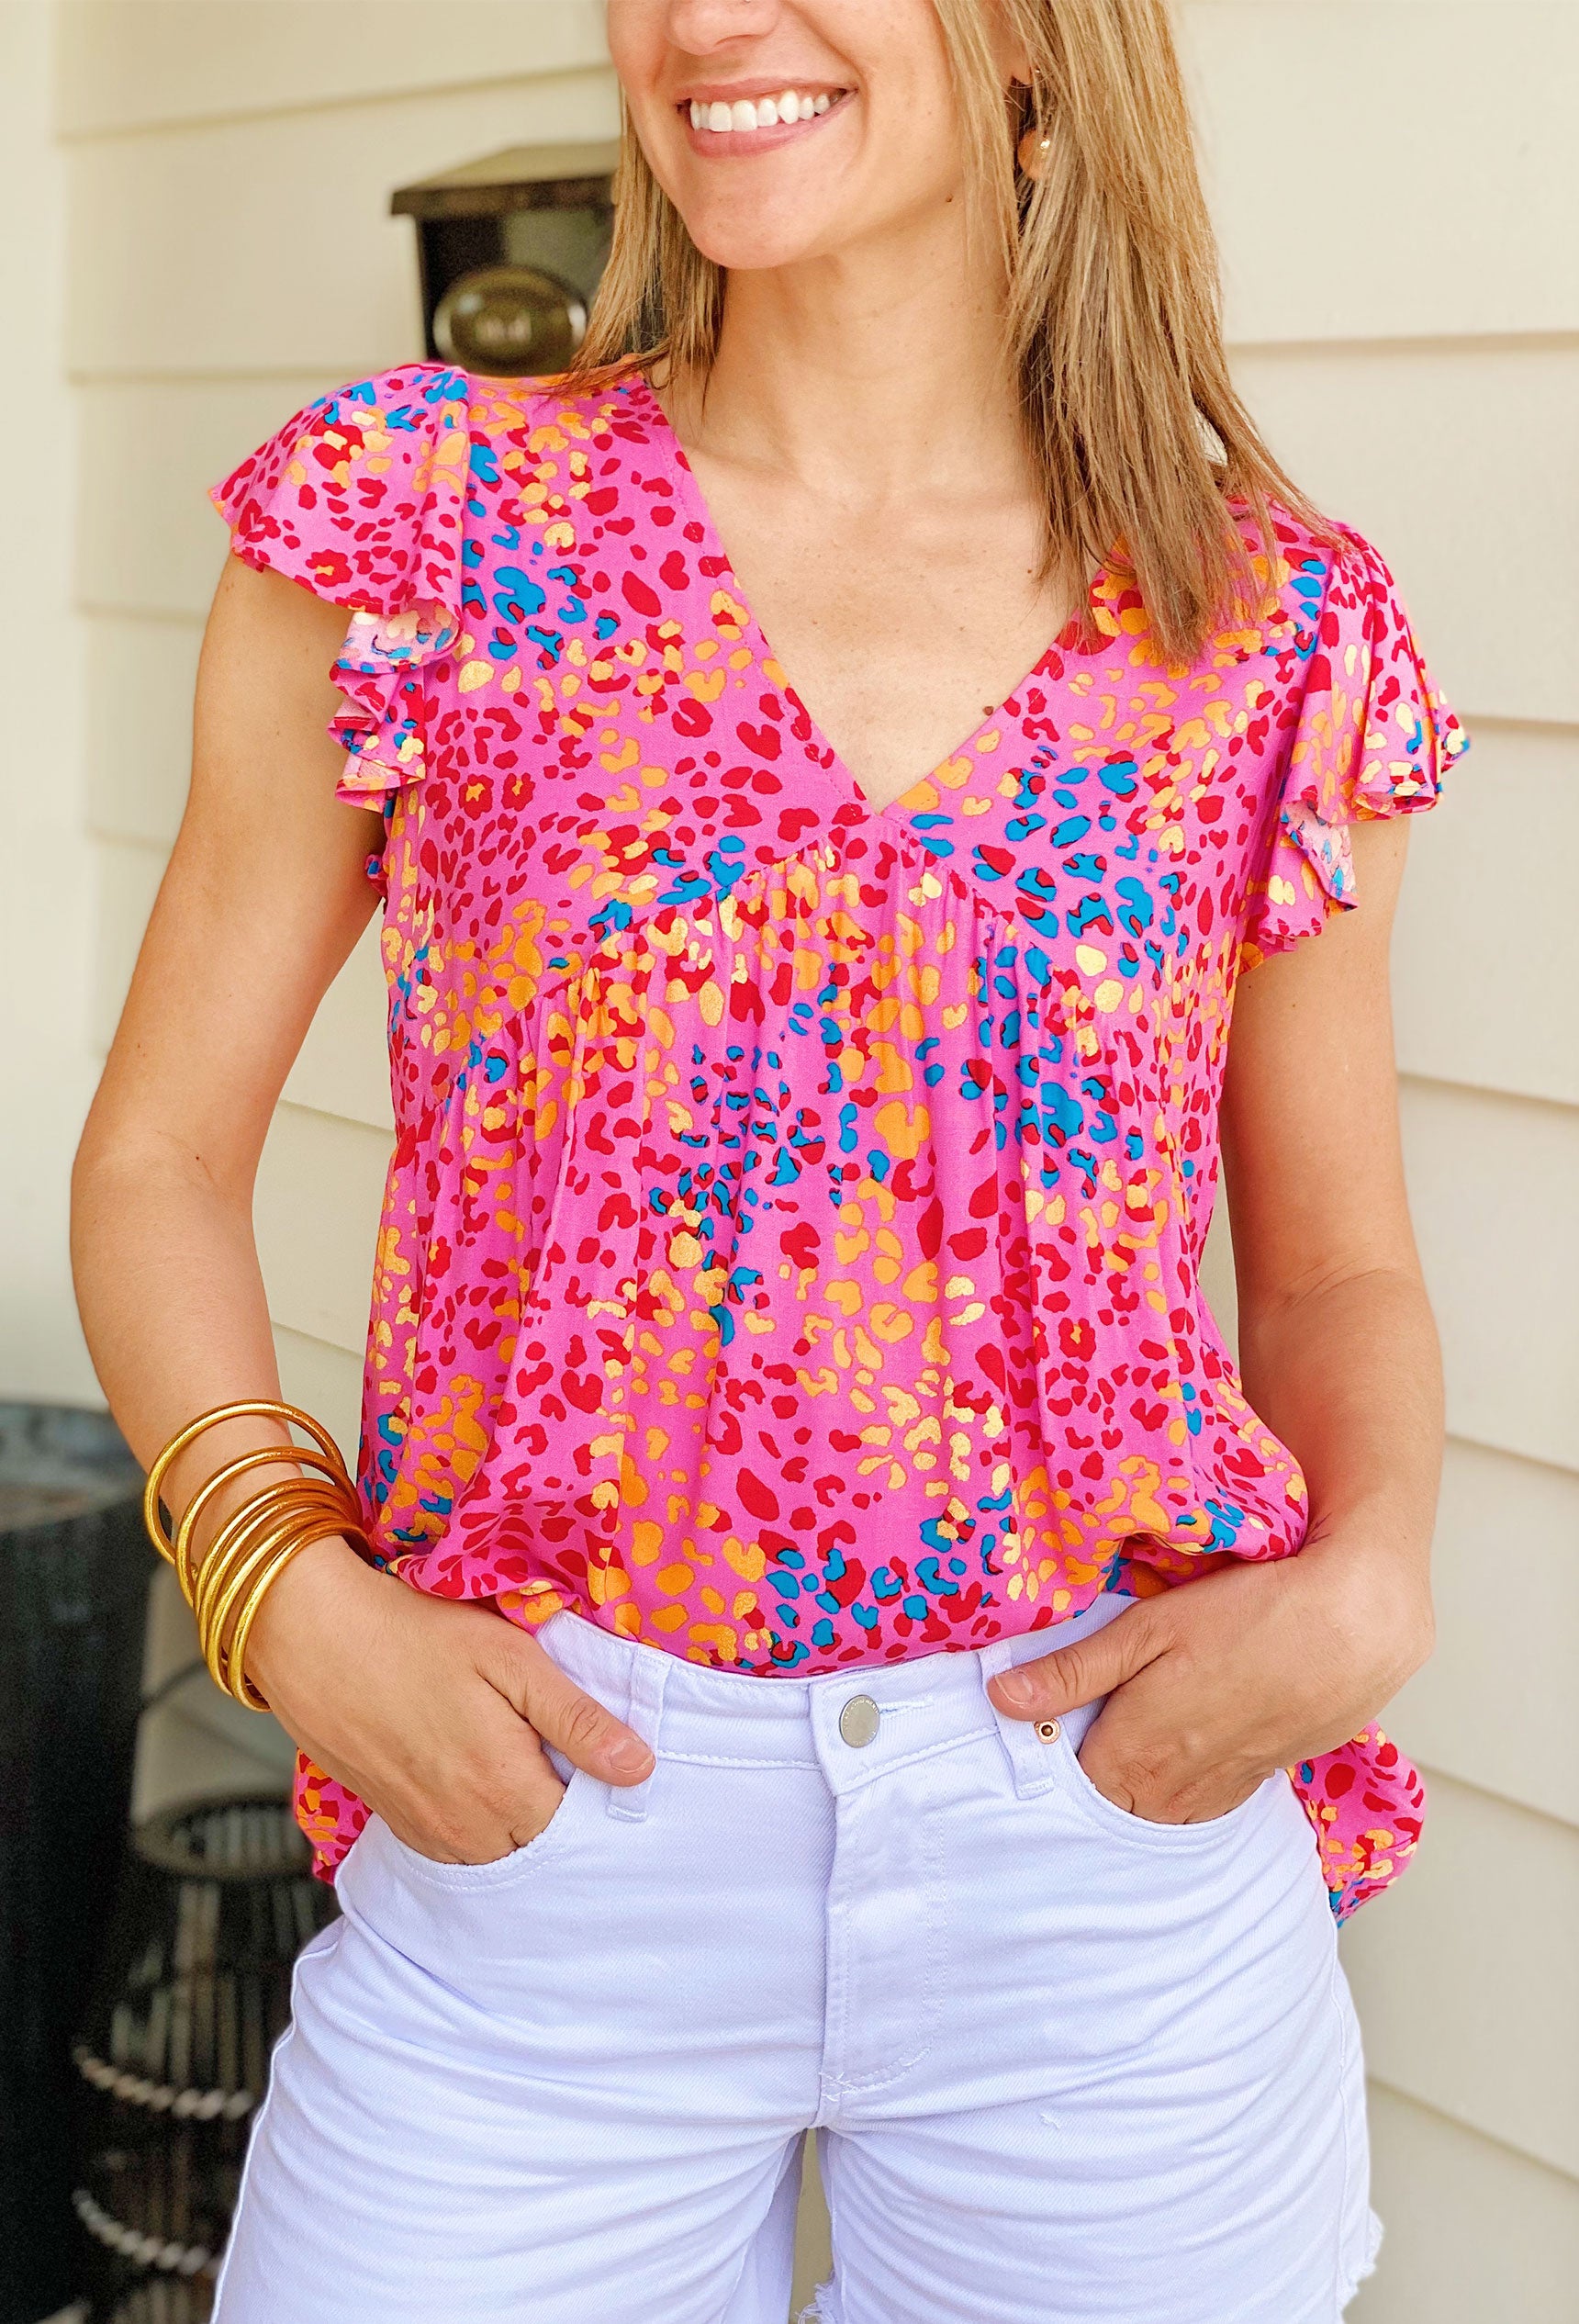 Spotted in Santorini Leopard Top, pink babydoll blouse with rainbow leopard design